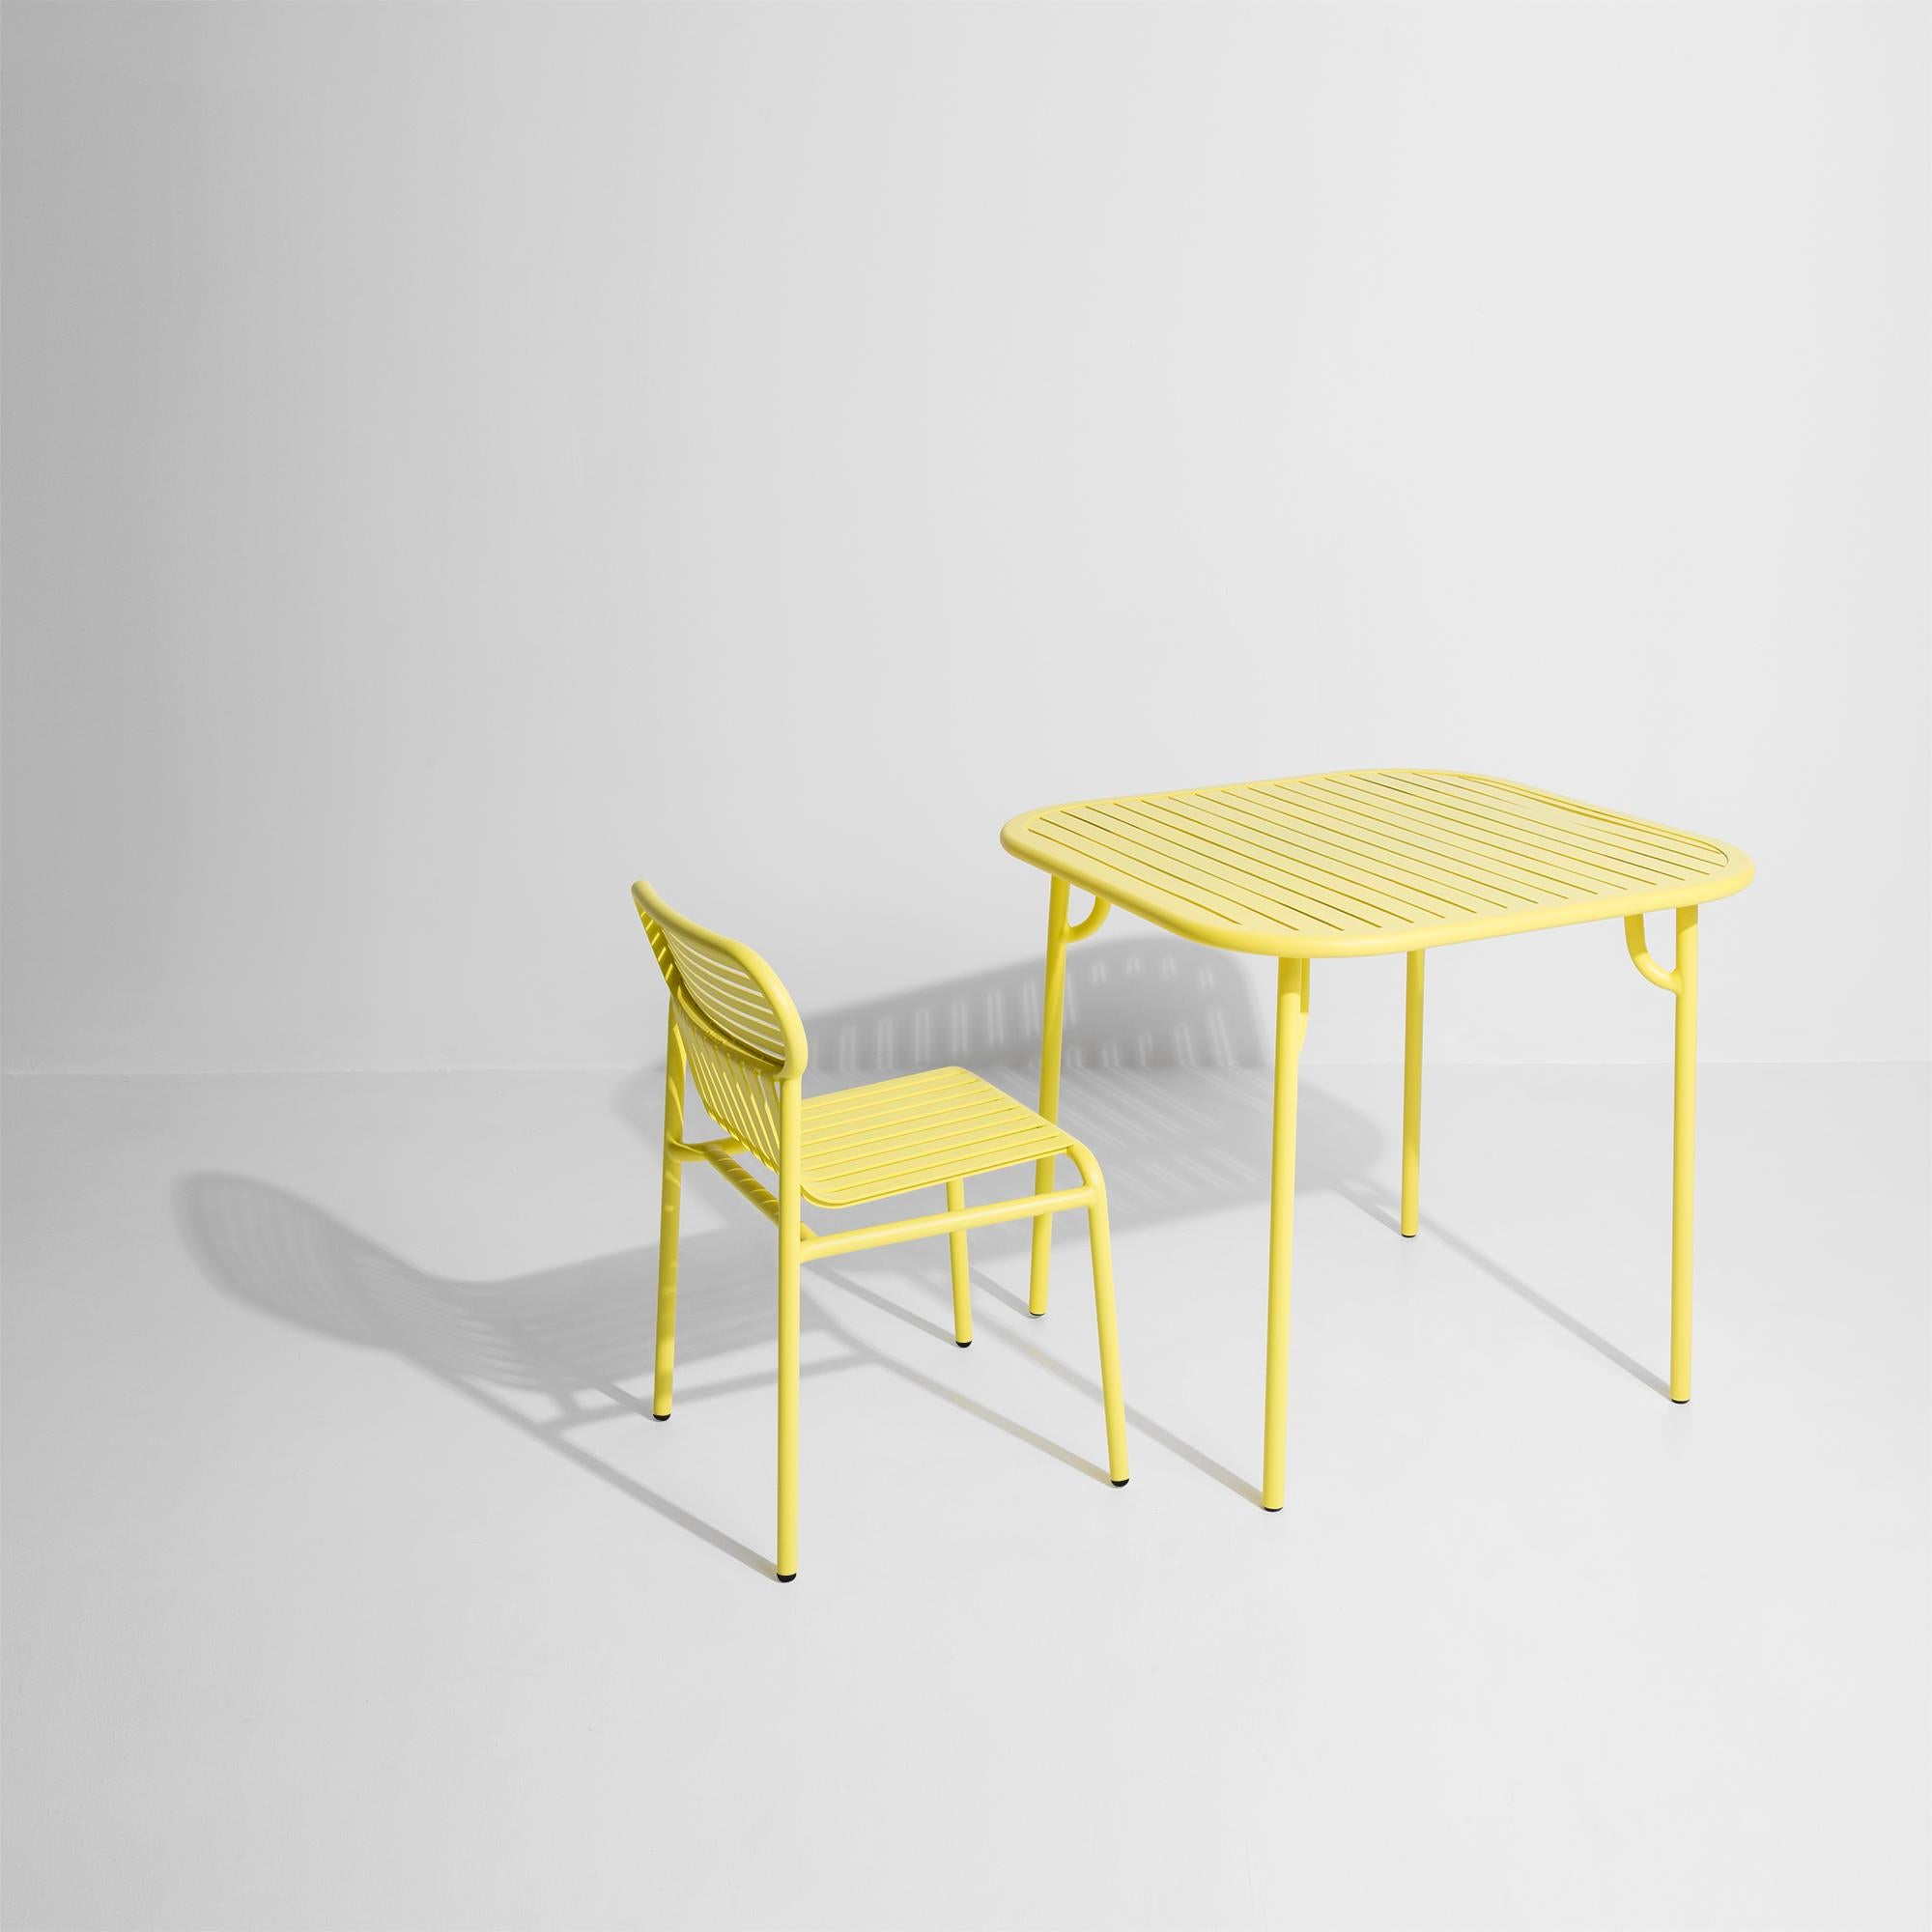 Chinese Petite Friture Week-End Square Dining Table in Yellow Aluminium with Slats For Sale